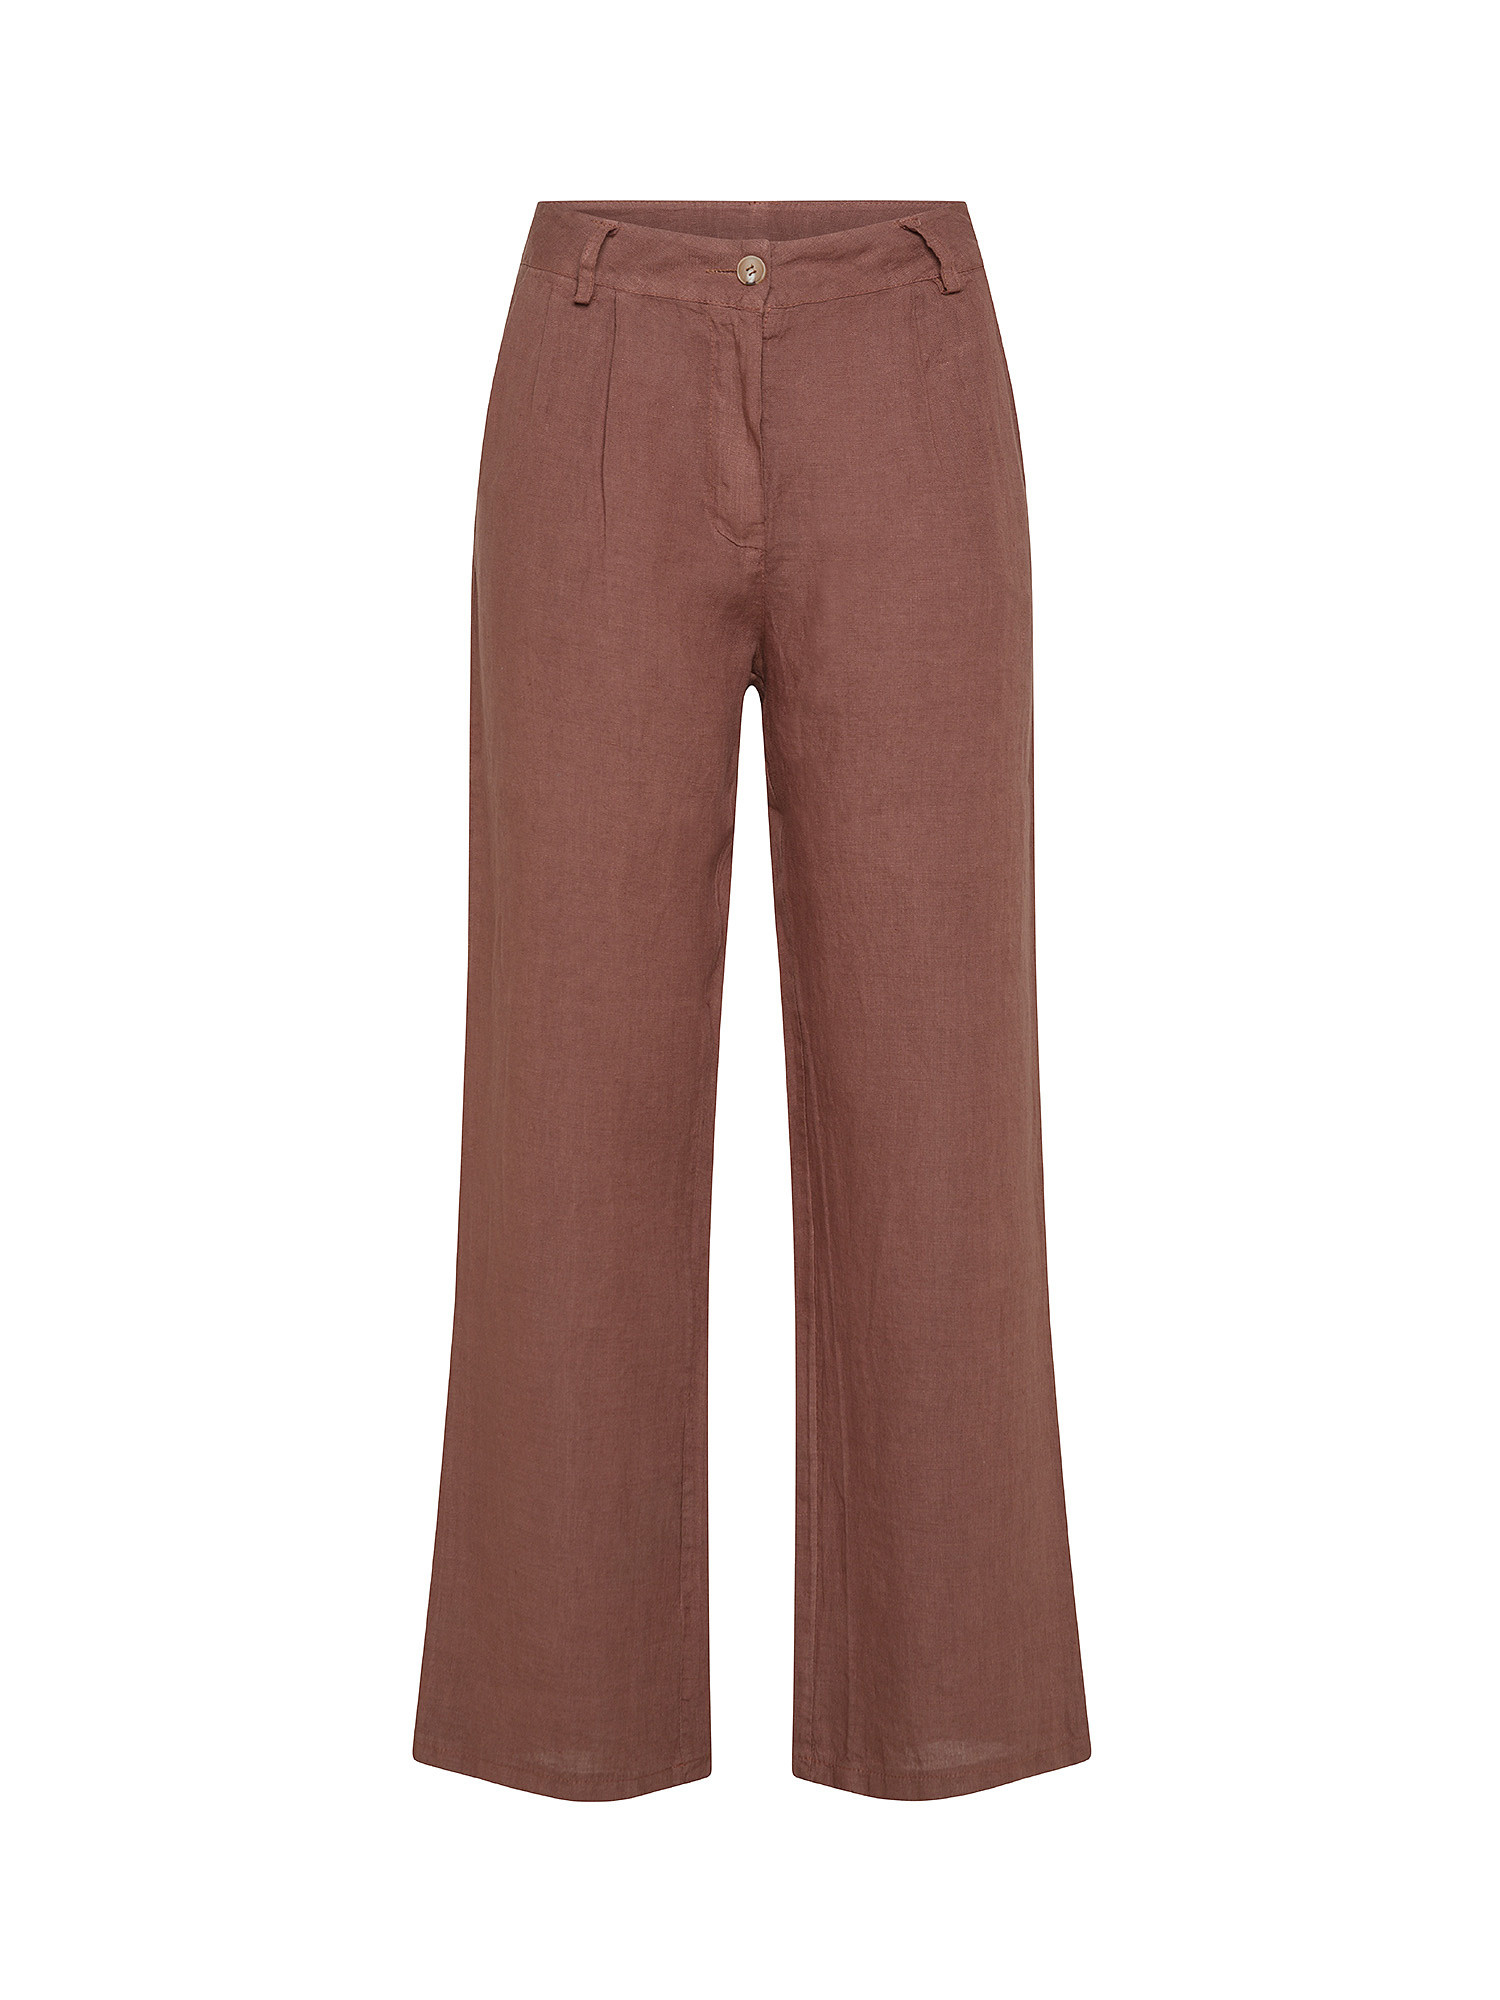 Koan - Linen trousers with pleats, Brown, large image number 0